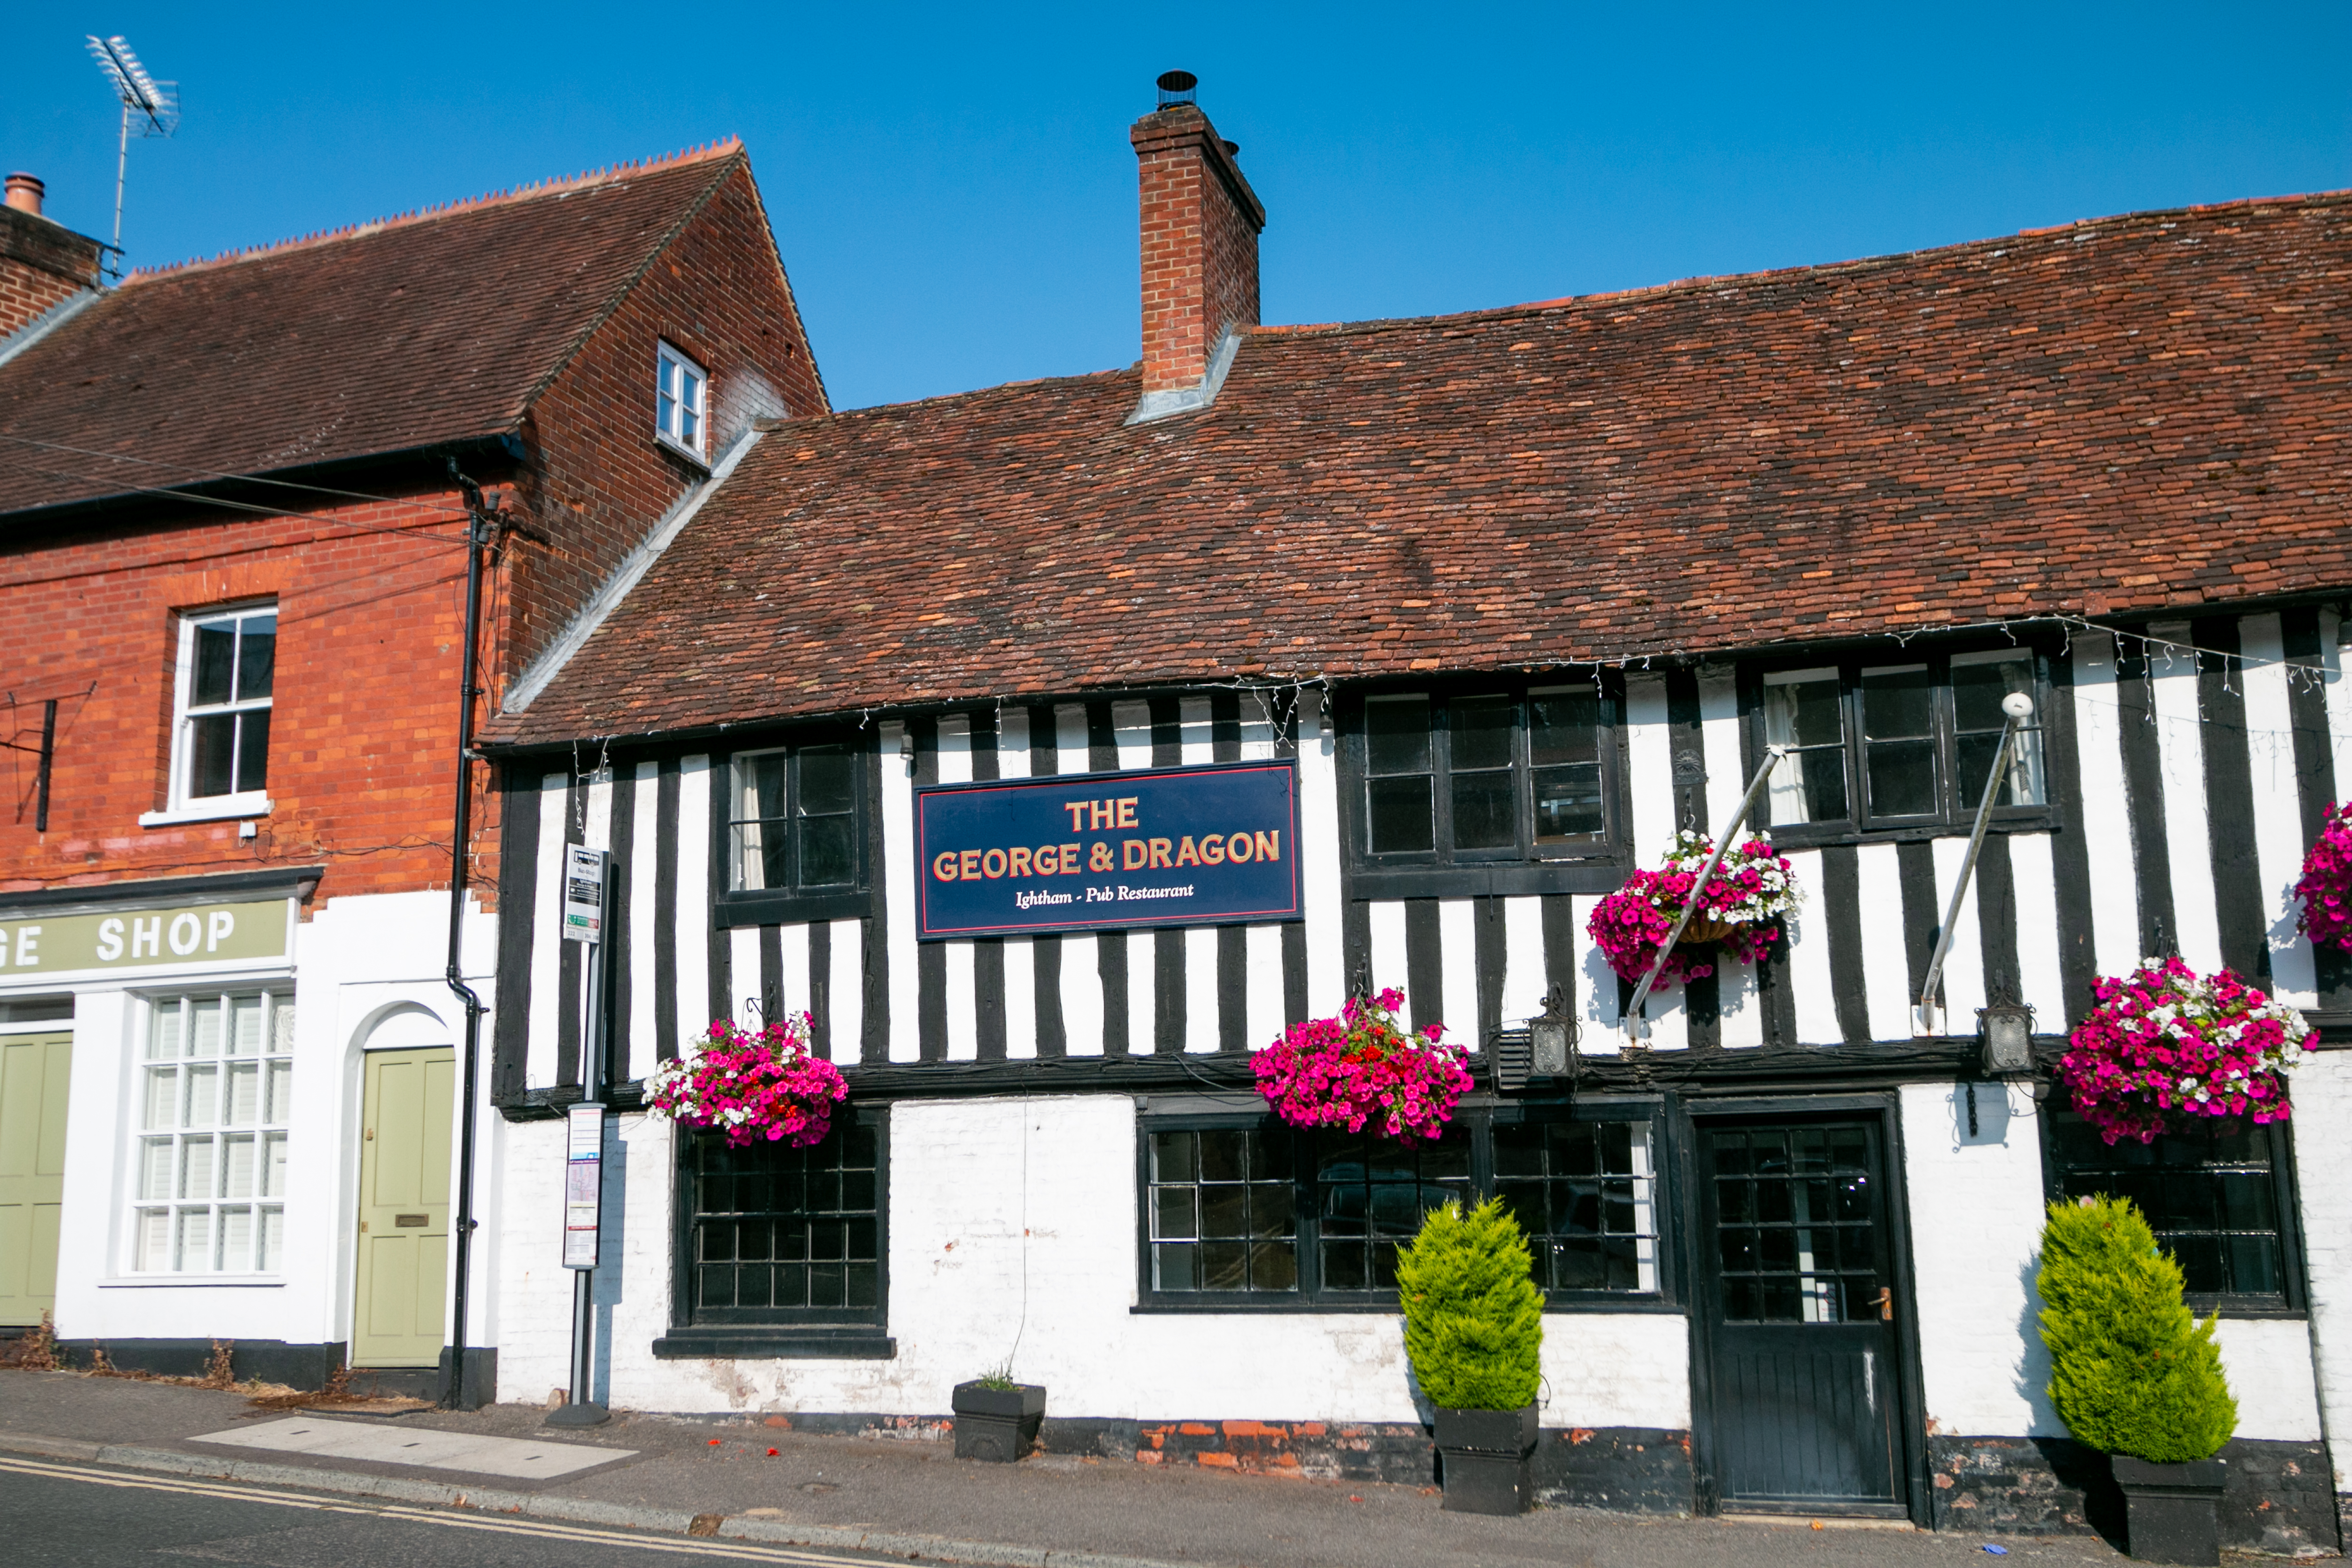 The George & Dragon is said to be the pub visited by Guy Fawkes